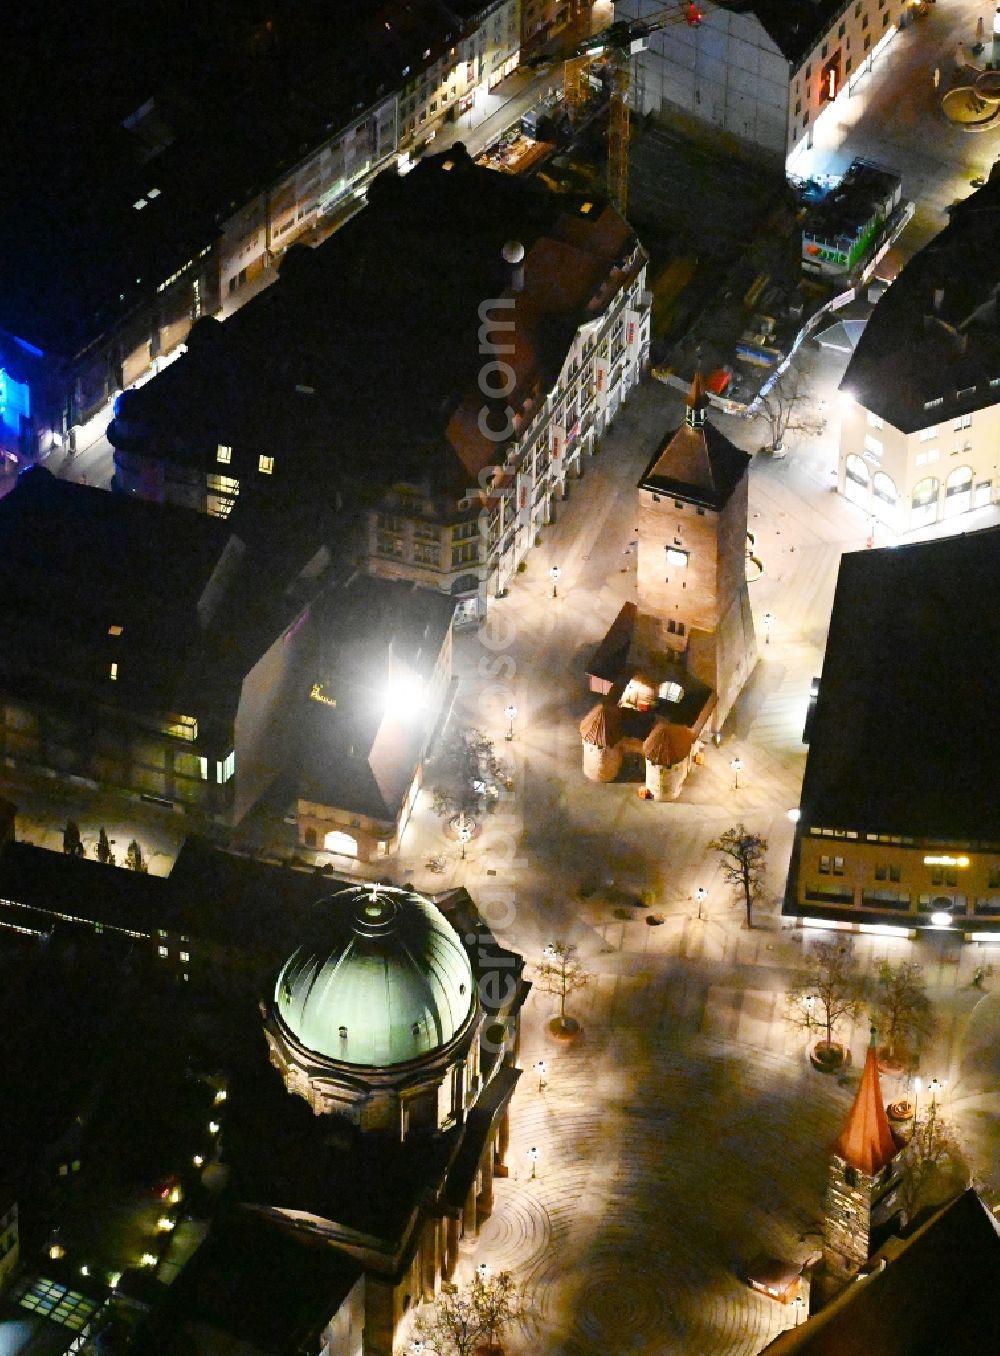 Aerial image at night Nürnberg - Night lighting Tower building Weisser Turm the rest of the former historic city walls in the district Altstadt - Sankt Lorenz in Nuremberg in the state Bavaria, Germany